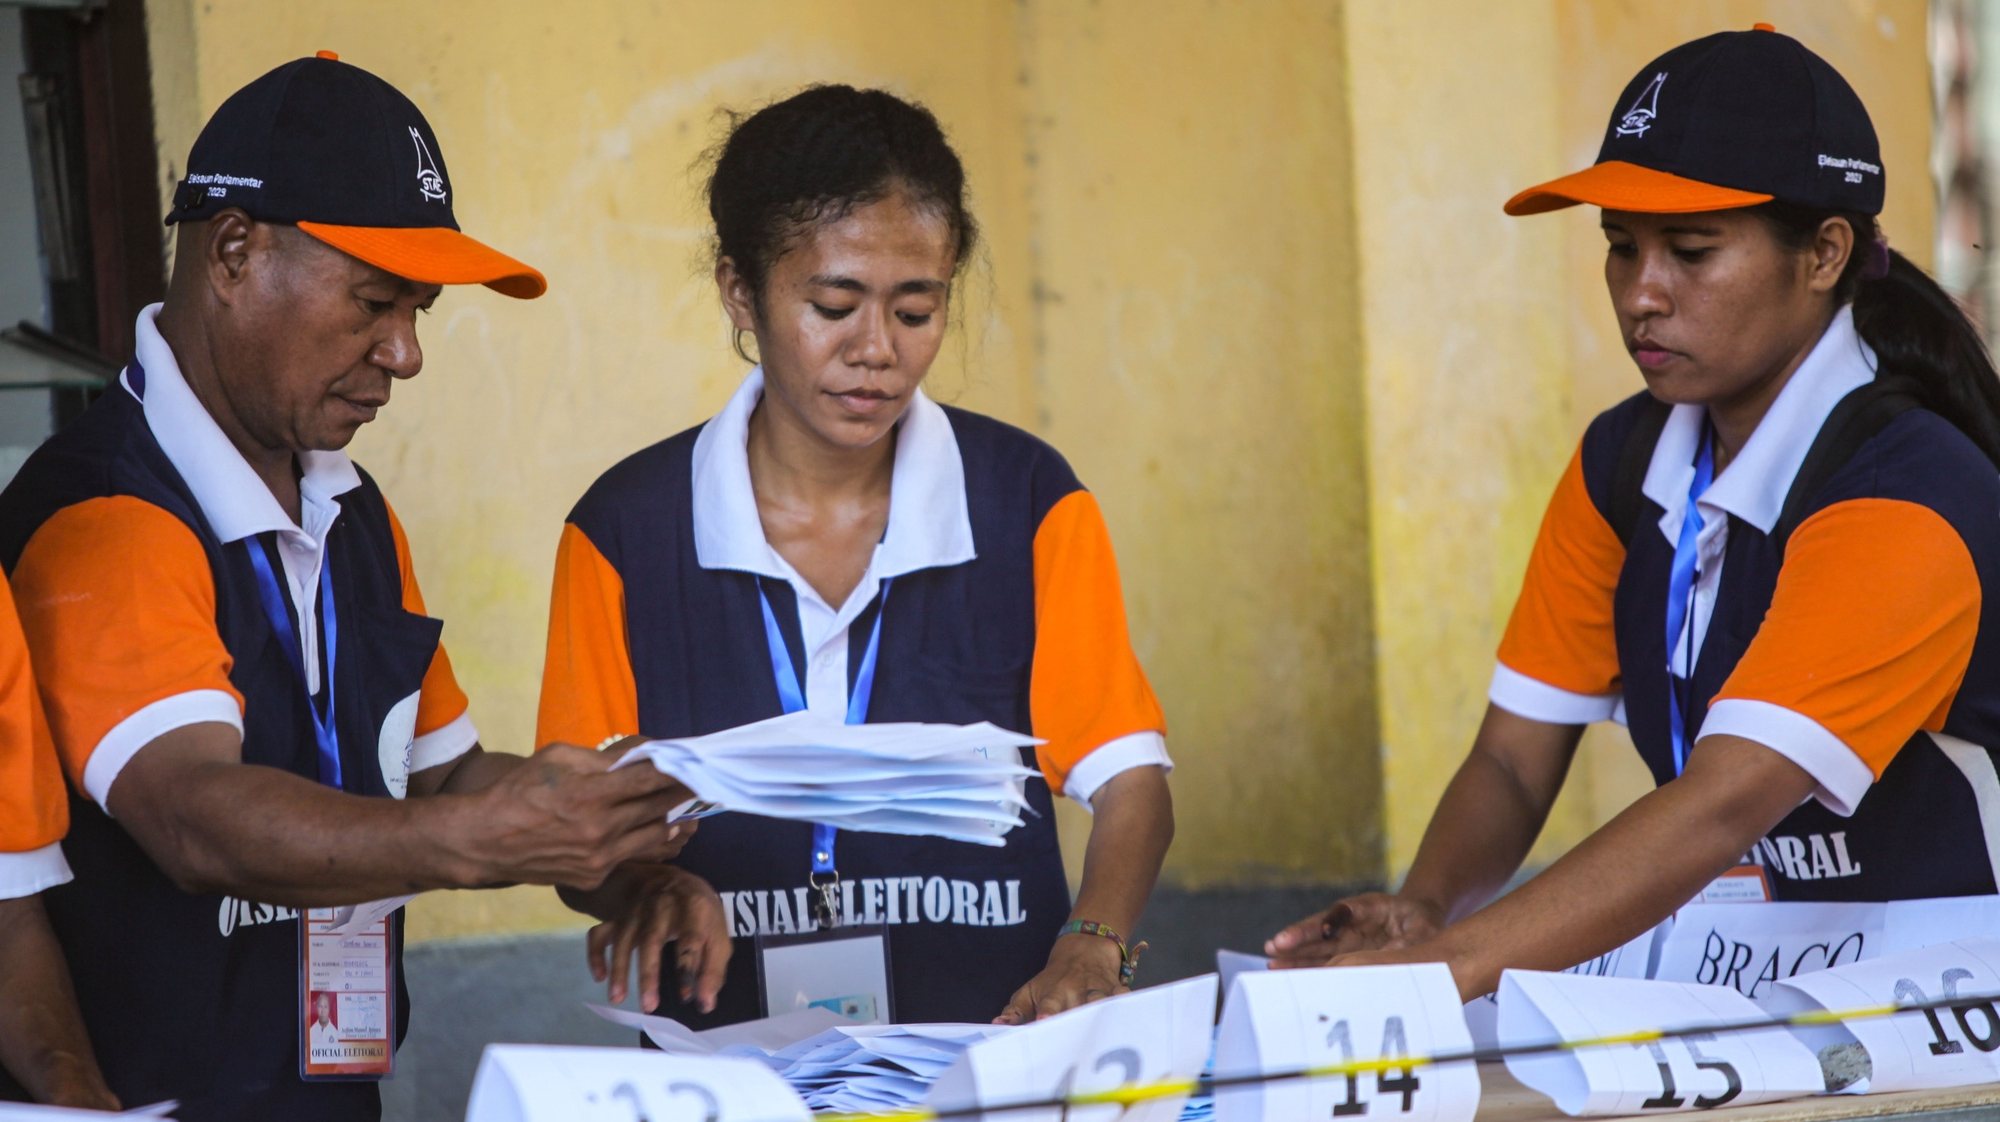 Election workers count votes during the parliamentary election at a polling station in Dili, East Timor, also known as Timor Leste, 21 May 2023. Seventeen Parties are contesting in the fifth elections in East Timor scheduled for 21 May, which may take several days to be counted. More than 890,000 voters are registered for the vote, in which the 65 members of the National Parliament will be chosen. JOAO CARREIRA/LUSA